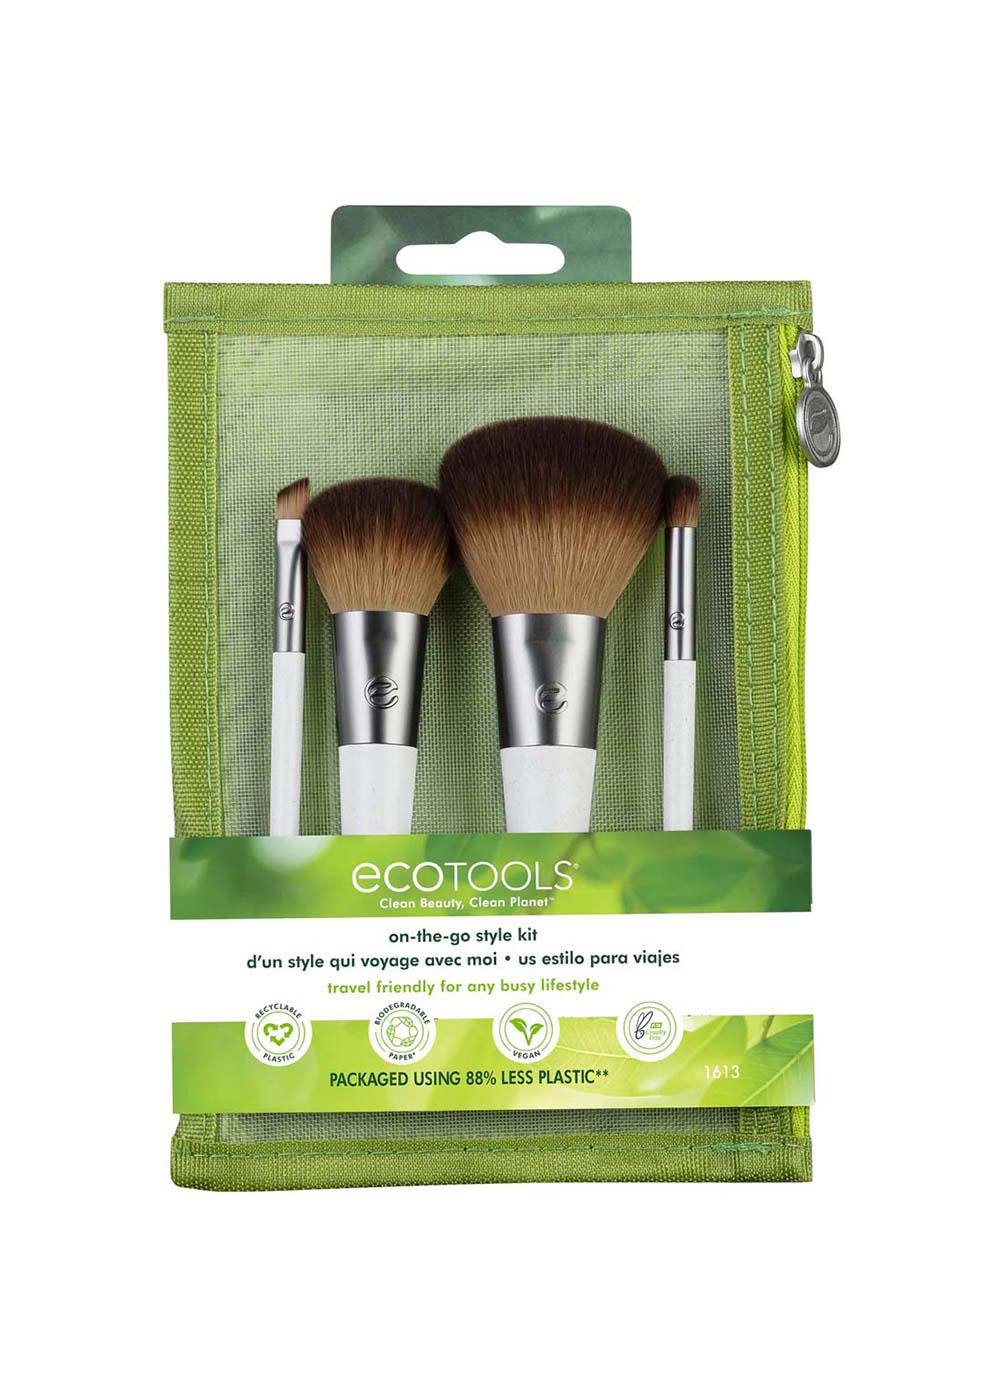 EcoTools On The Go Style Kit; image 1 of 7